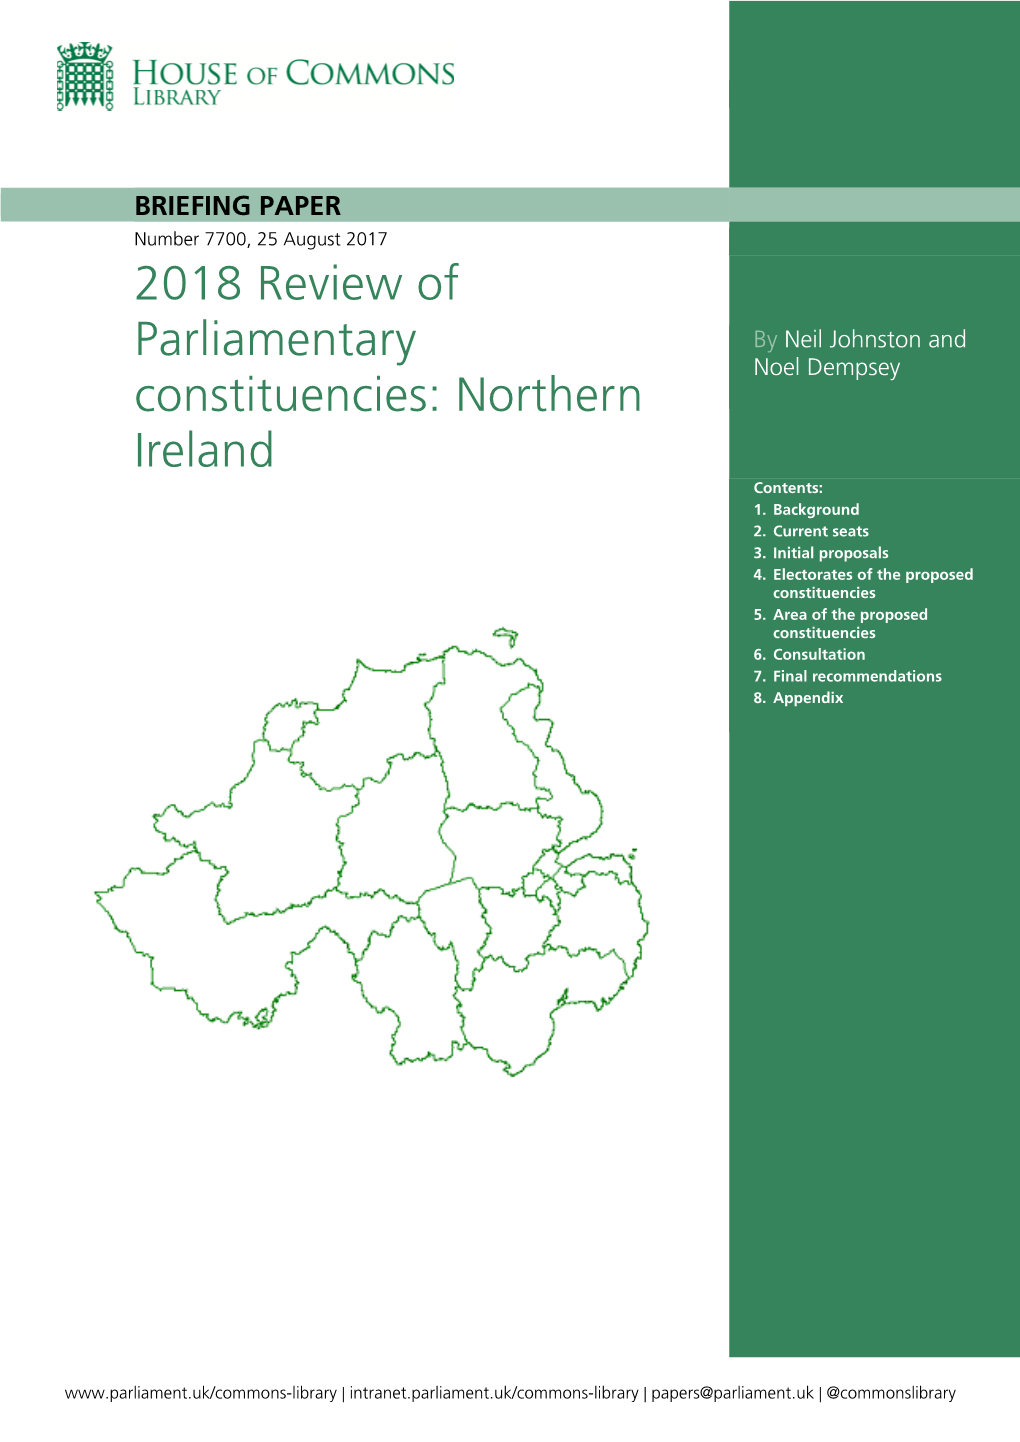 2018 Review of Parliamentary Constituencies: Northern Ireland